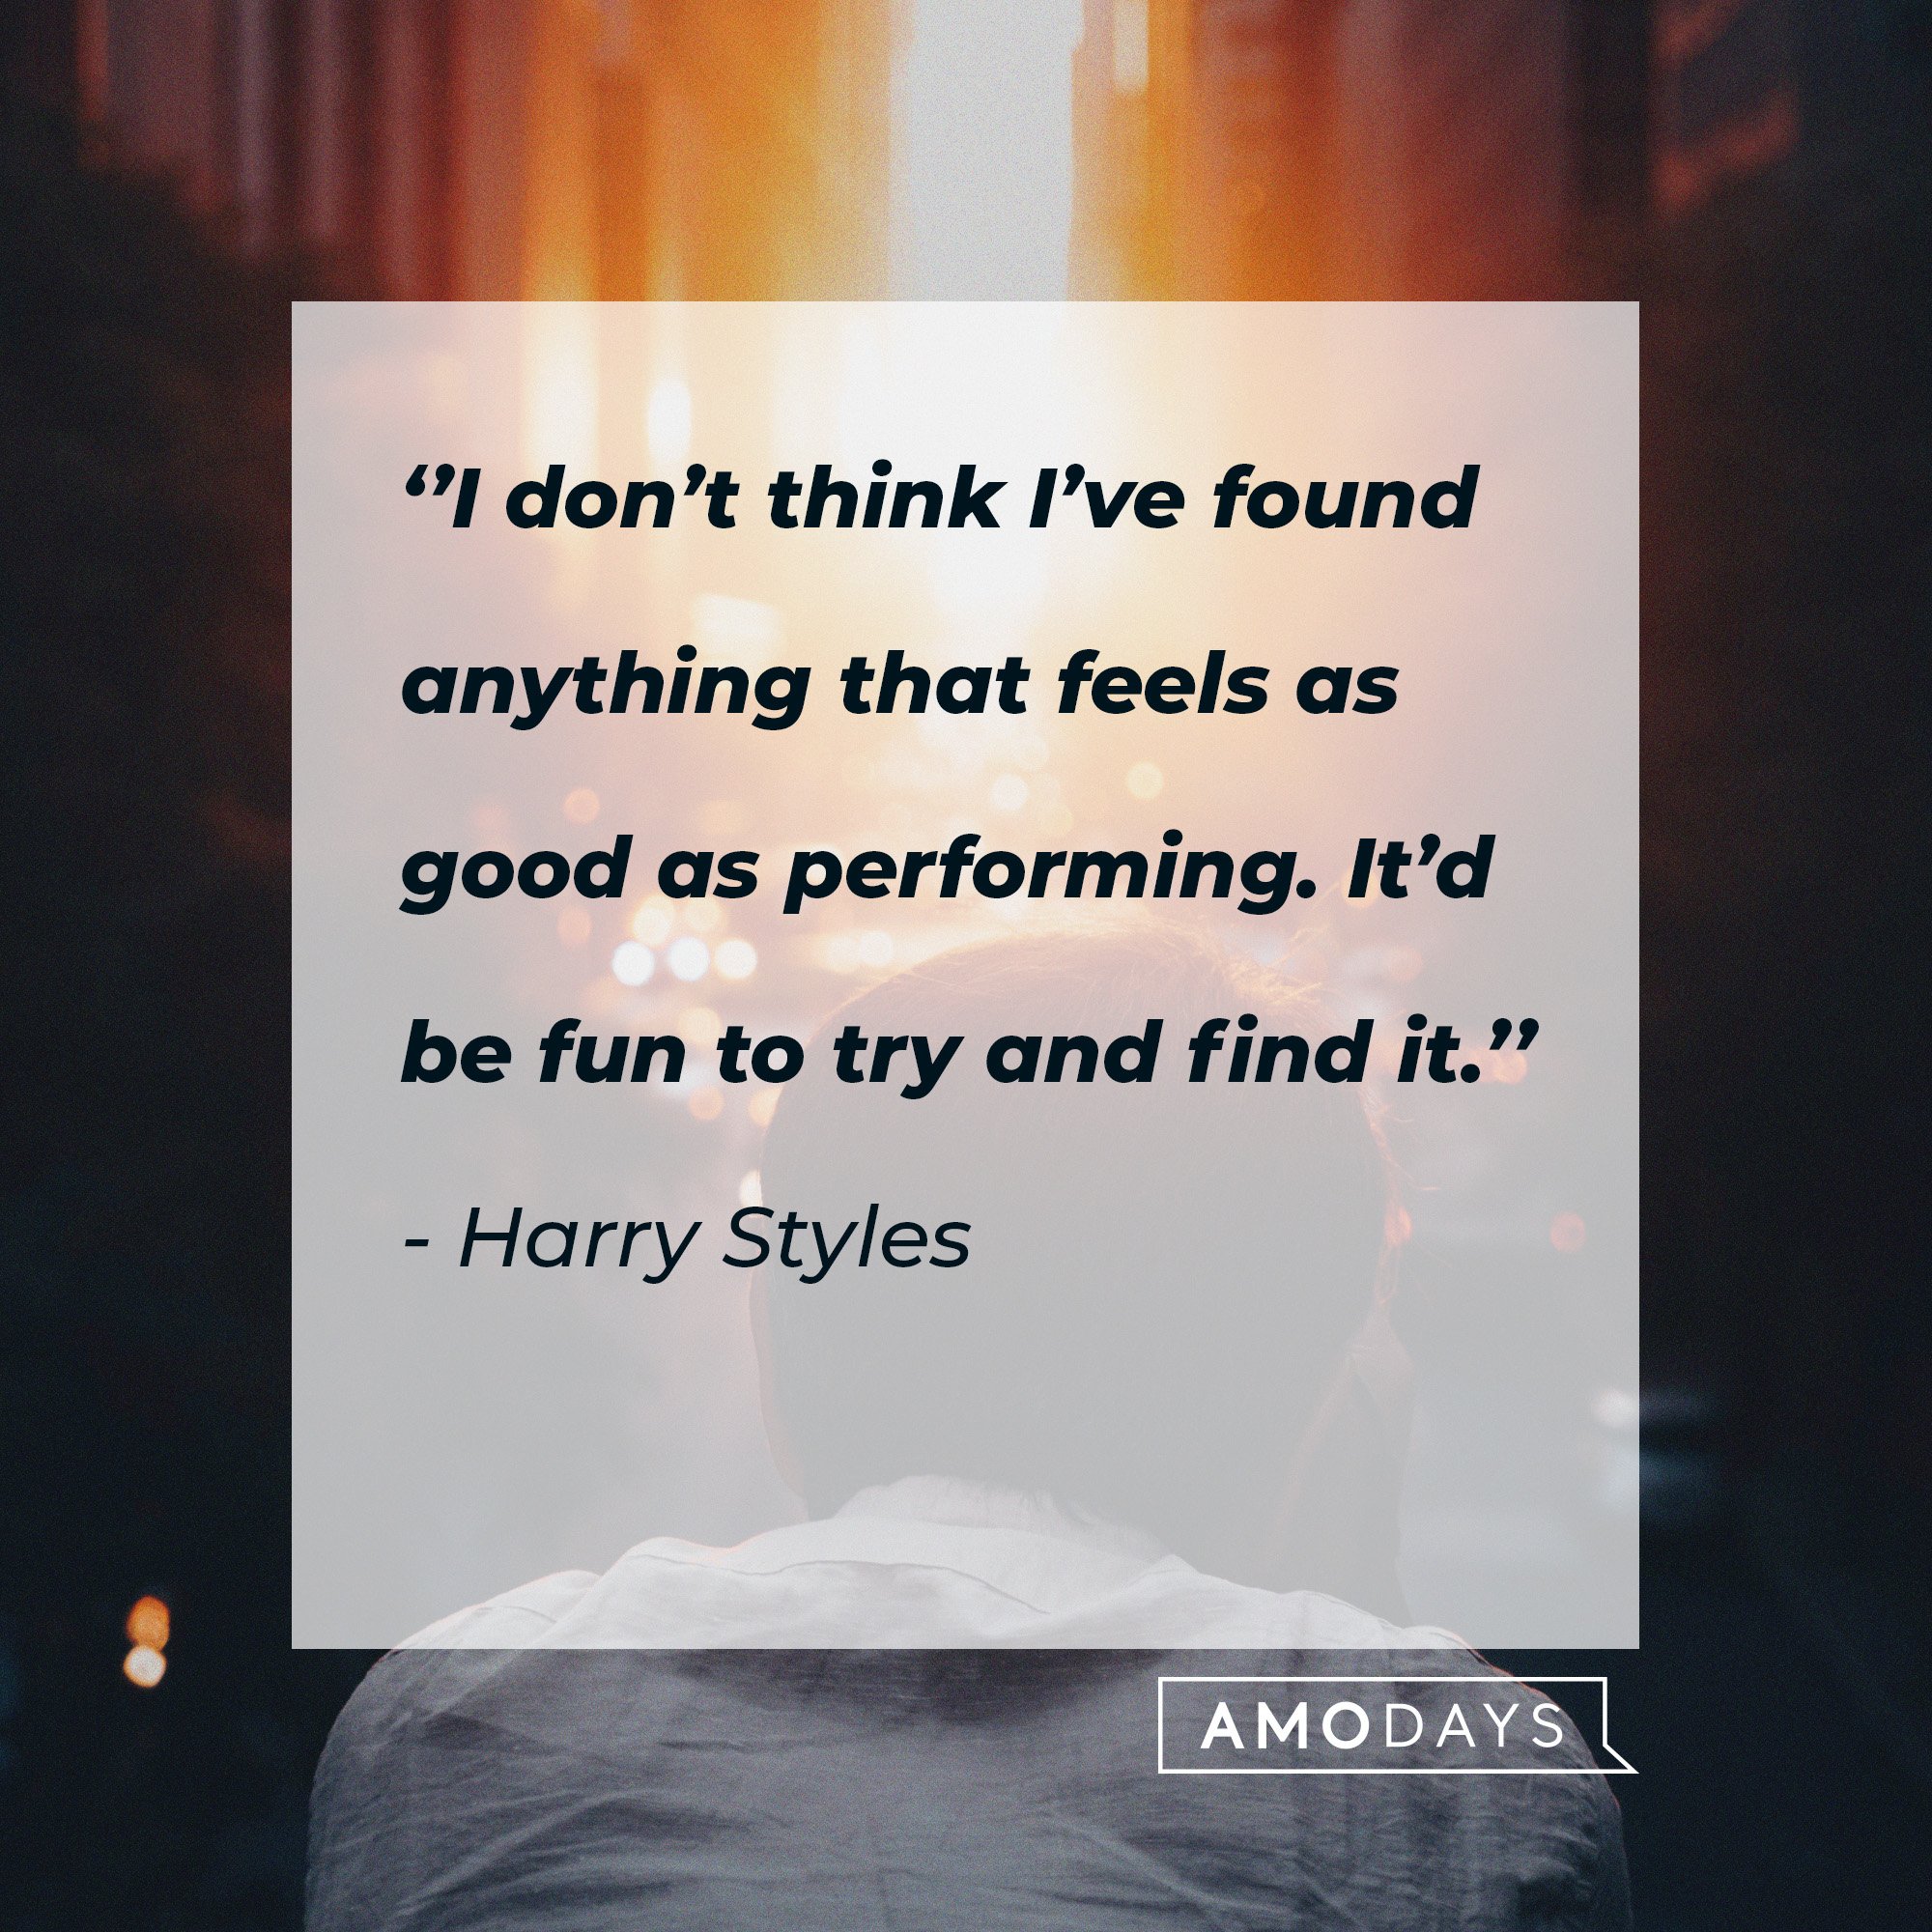 Harry Styles’ quote: ‘’I don’t think I’ve found anything that feels as good as performing. It’d be fun to try and find it." |  Source: AmoDays